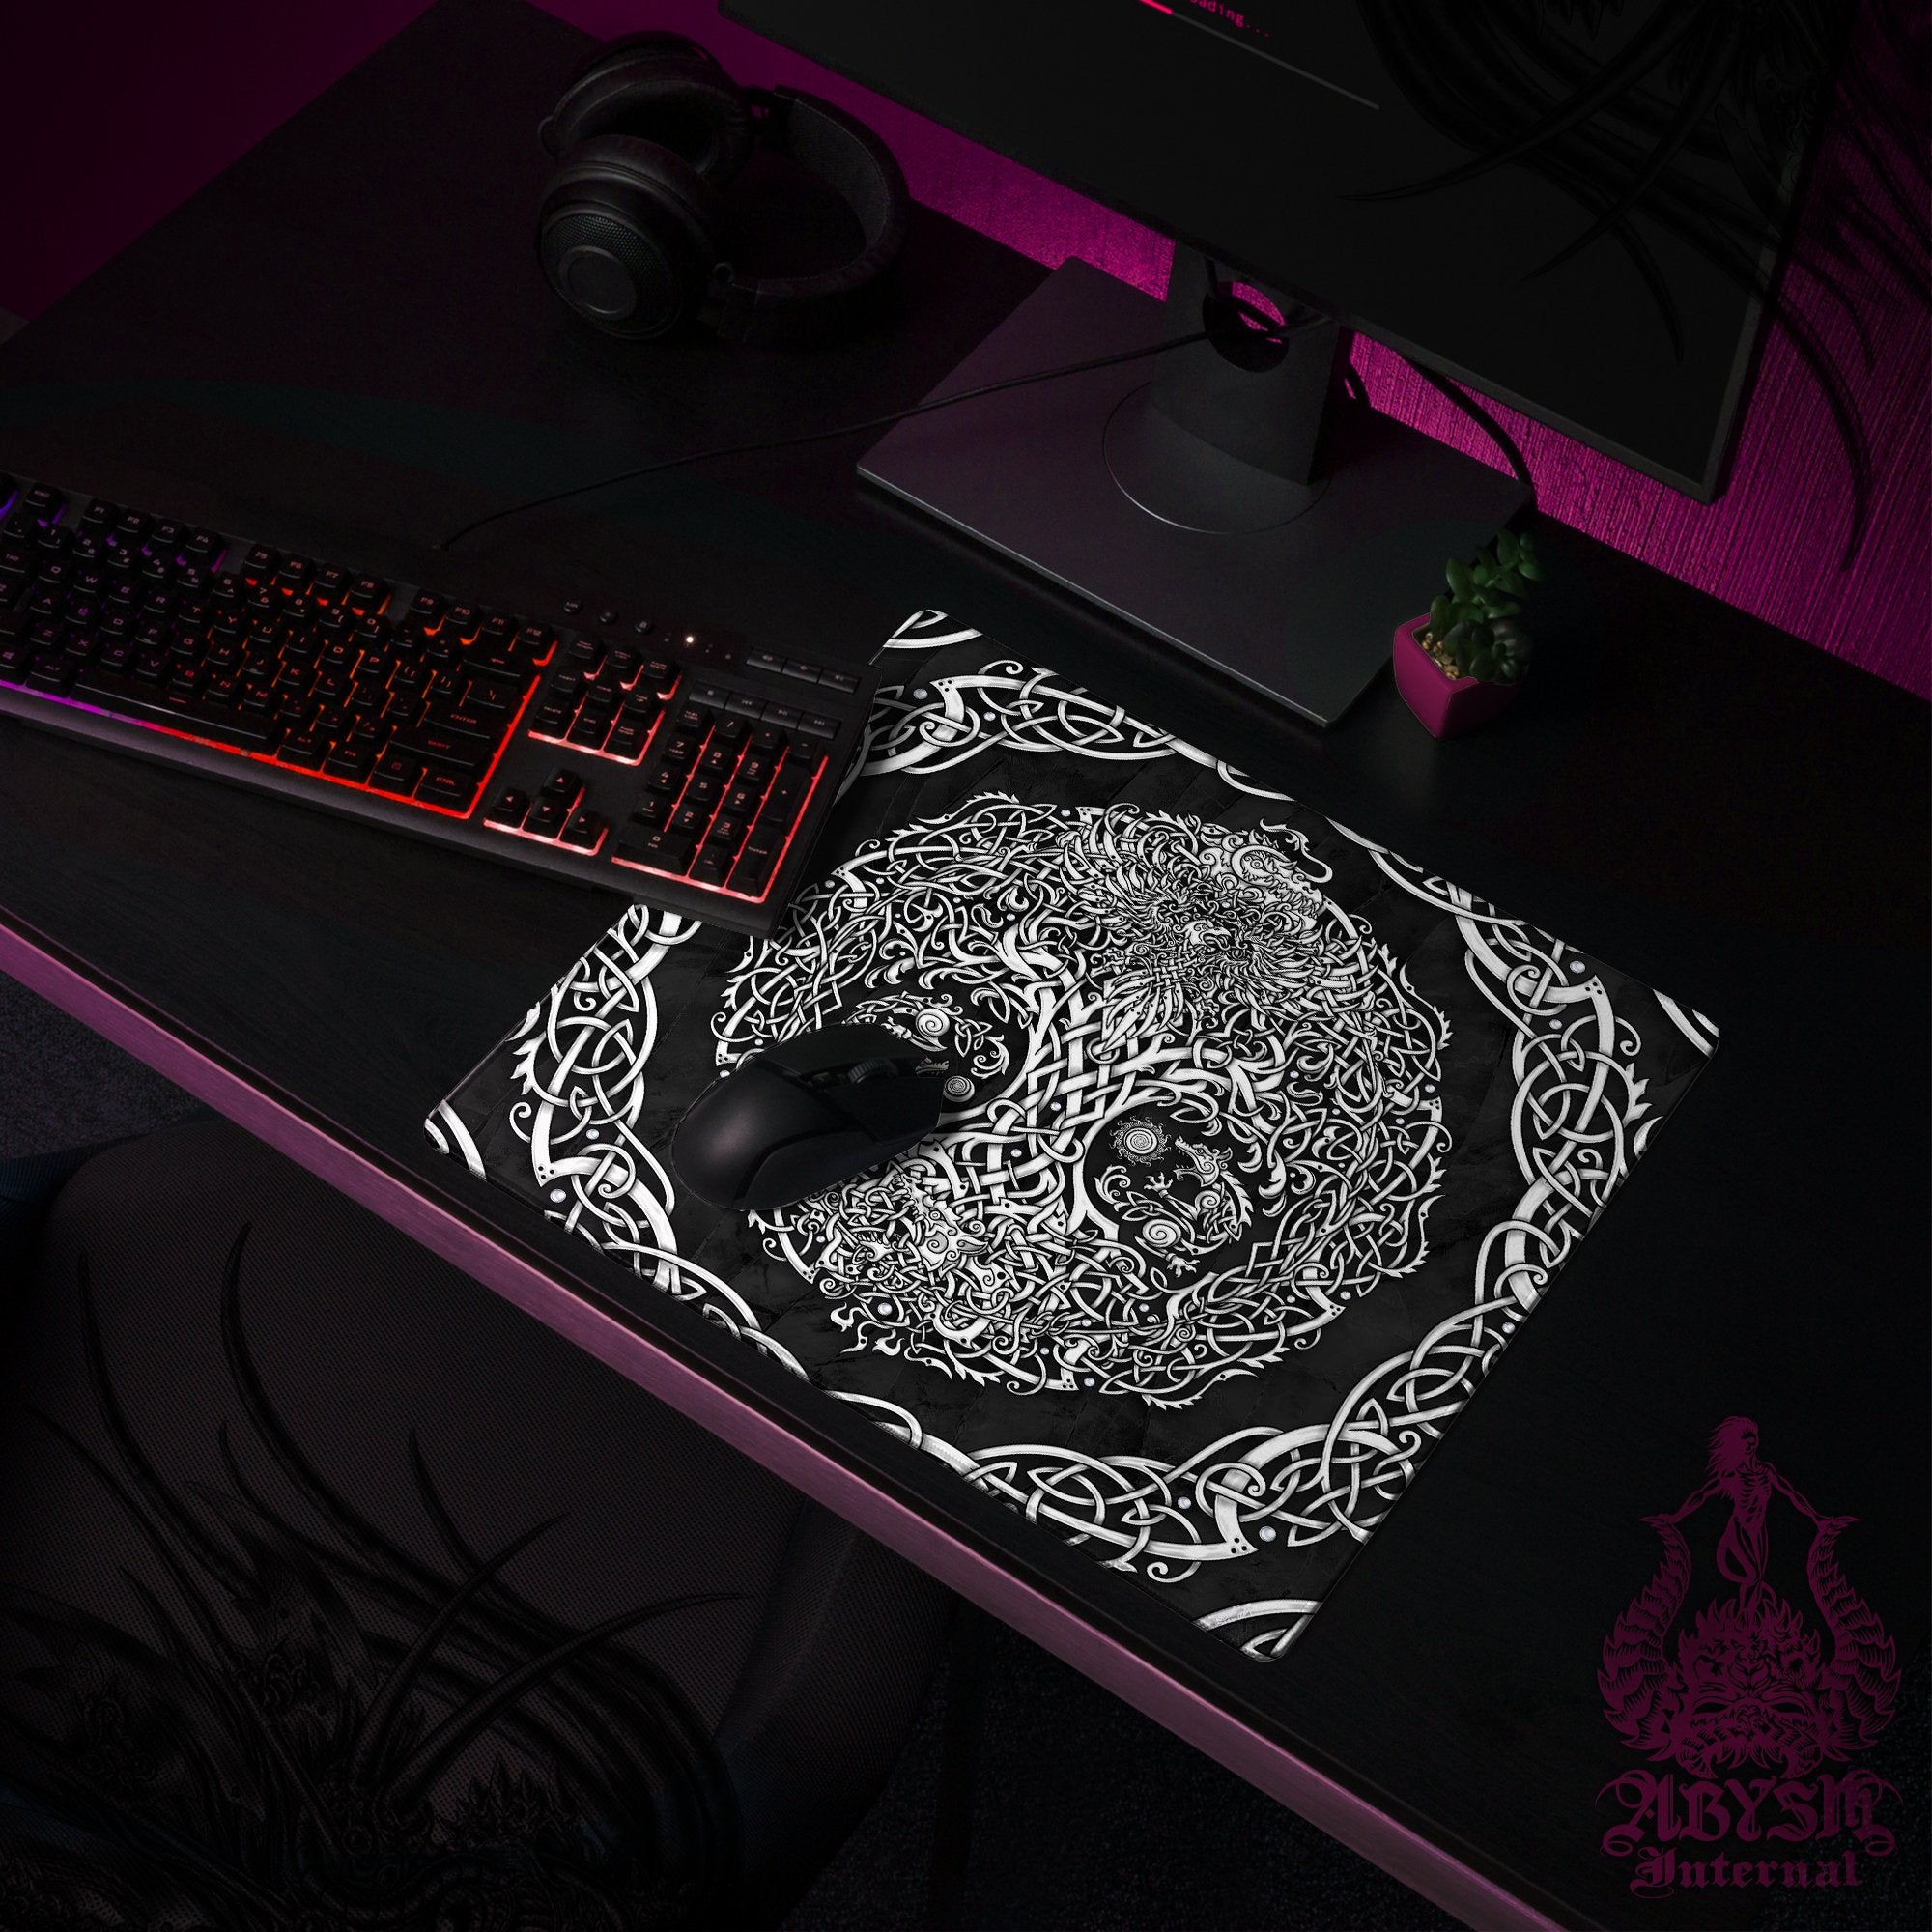 Yggdrasil Mouse Pad, Viking Gaming Desk Mat, Norse Tree of Life Workpad, Knotwork Table Protector Cover, Nordic Art Print - 3 Colors - Abysm Internal